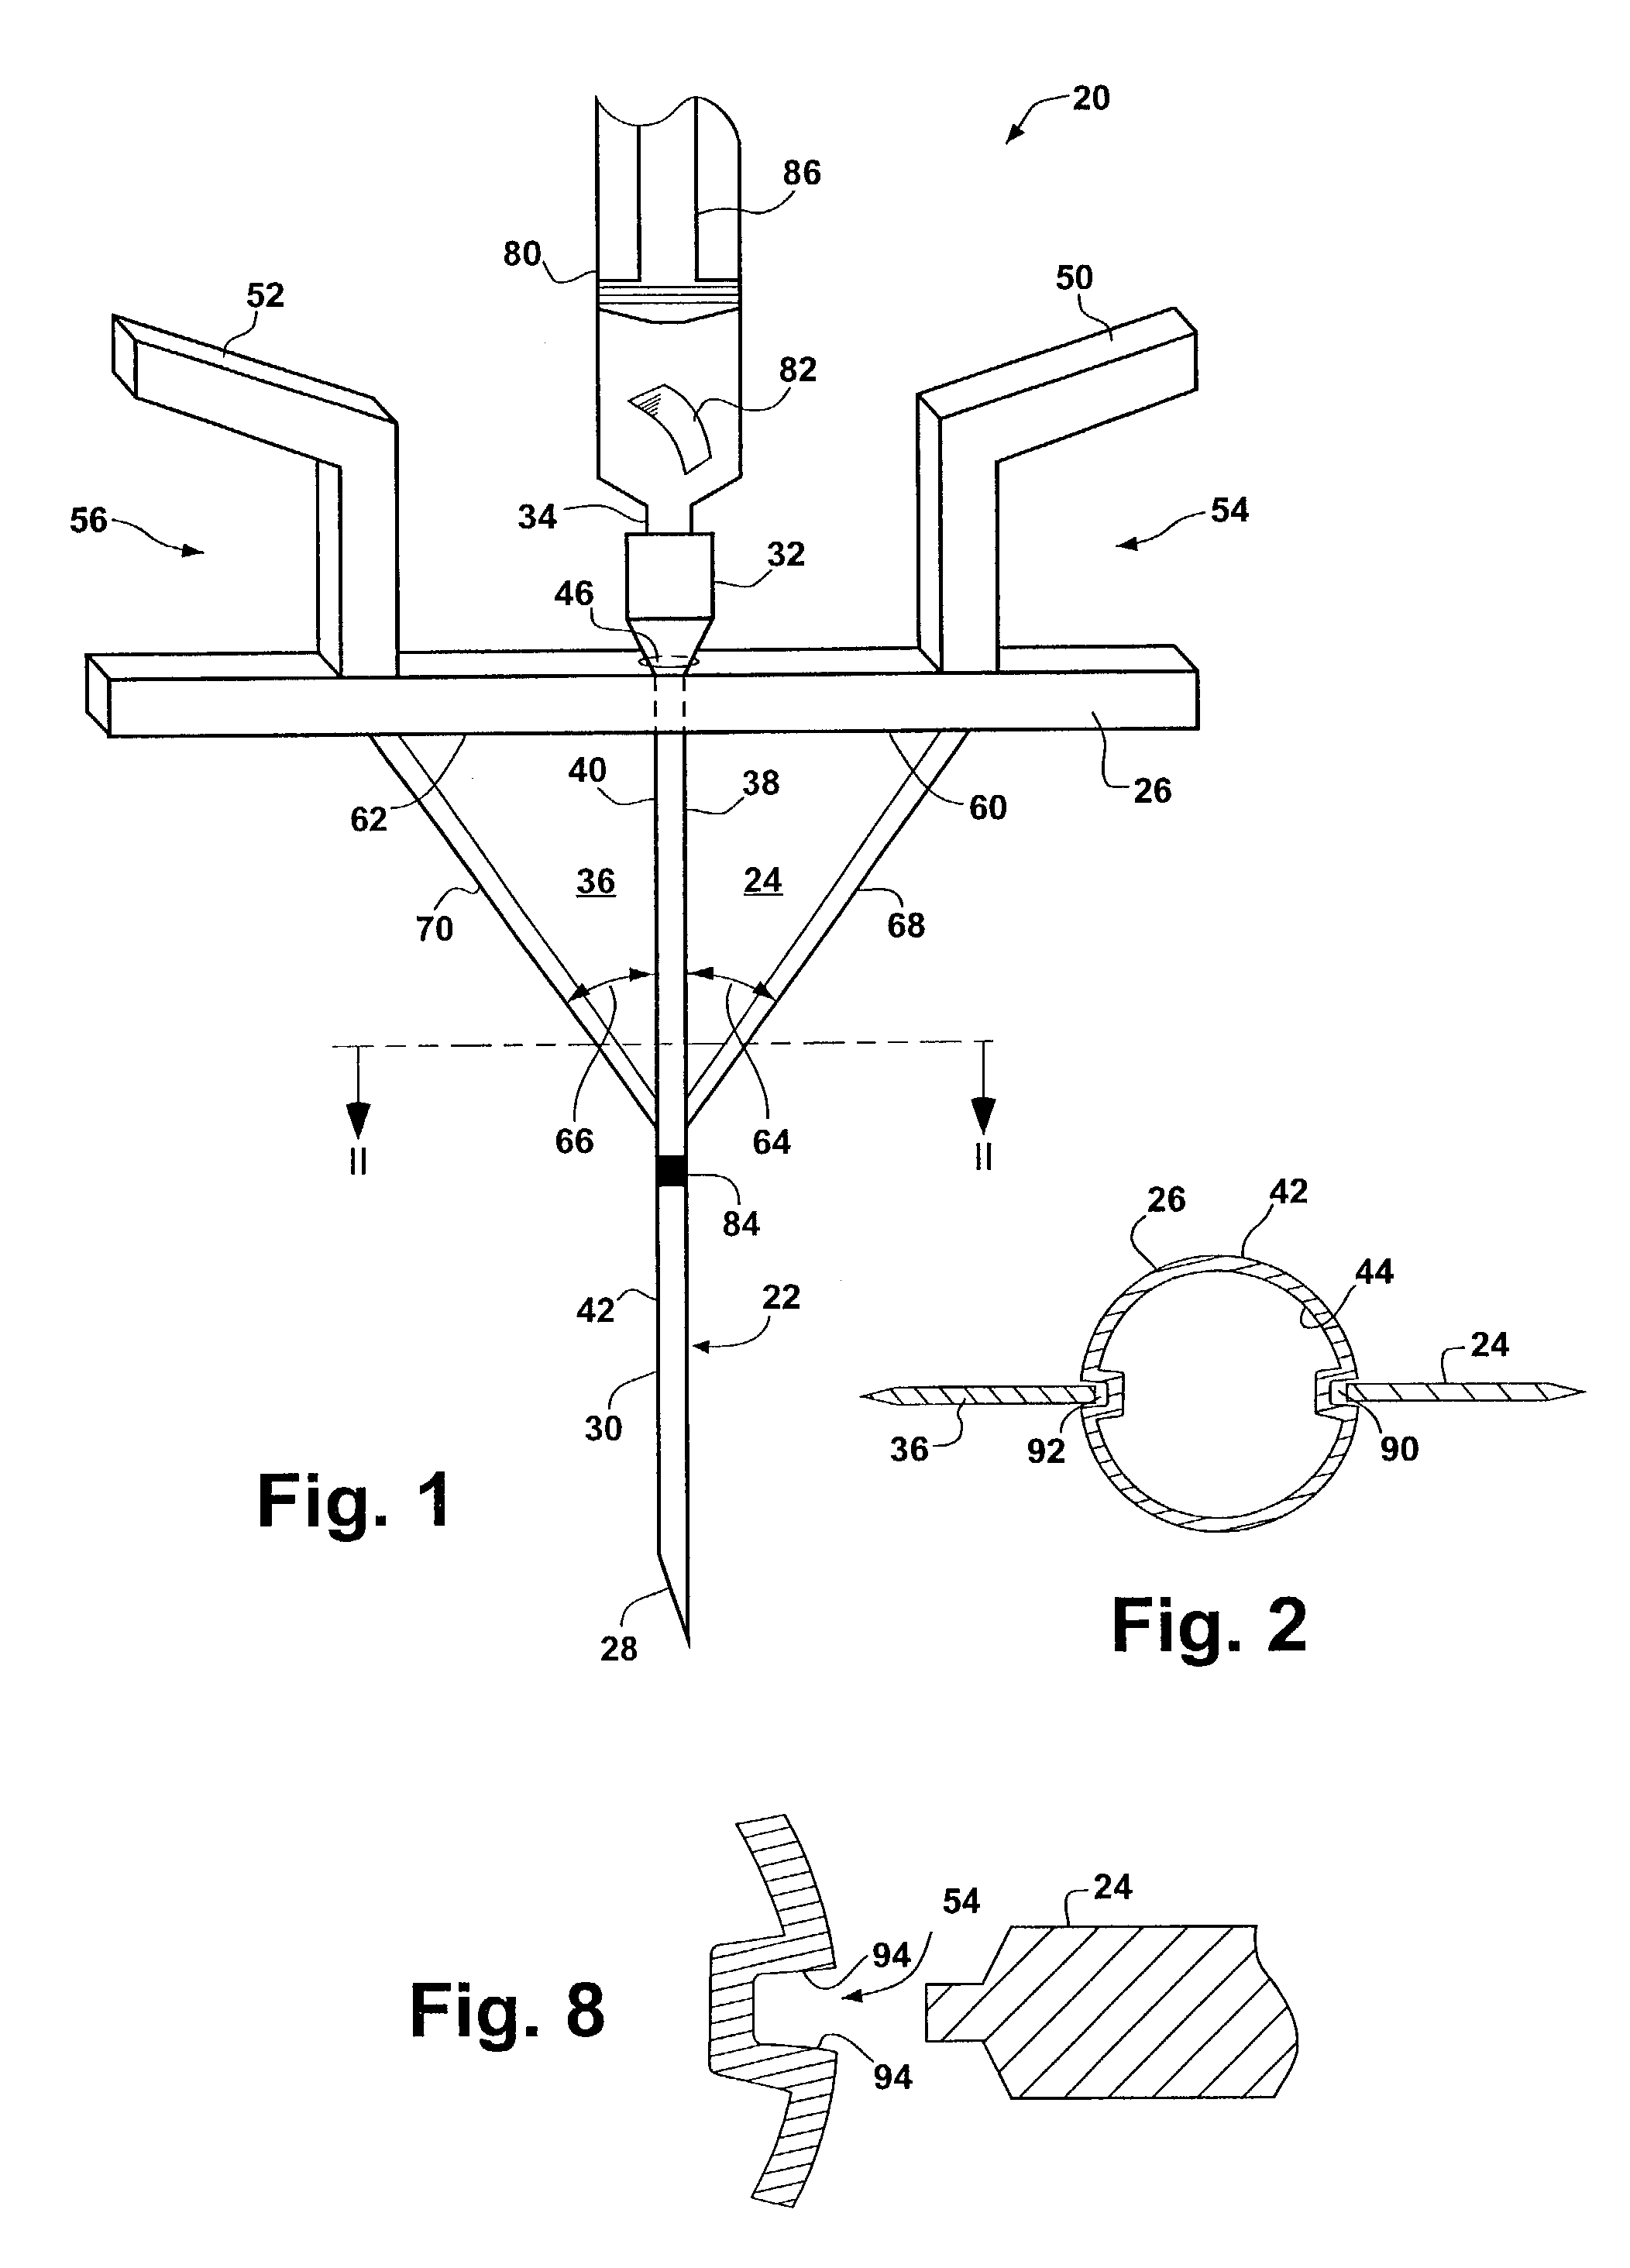 Method and apparatus for making a precise surgical incision